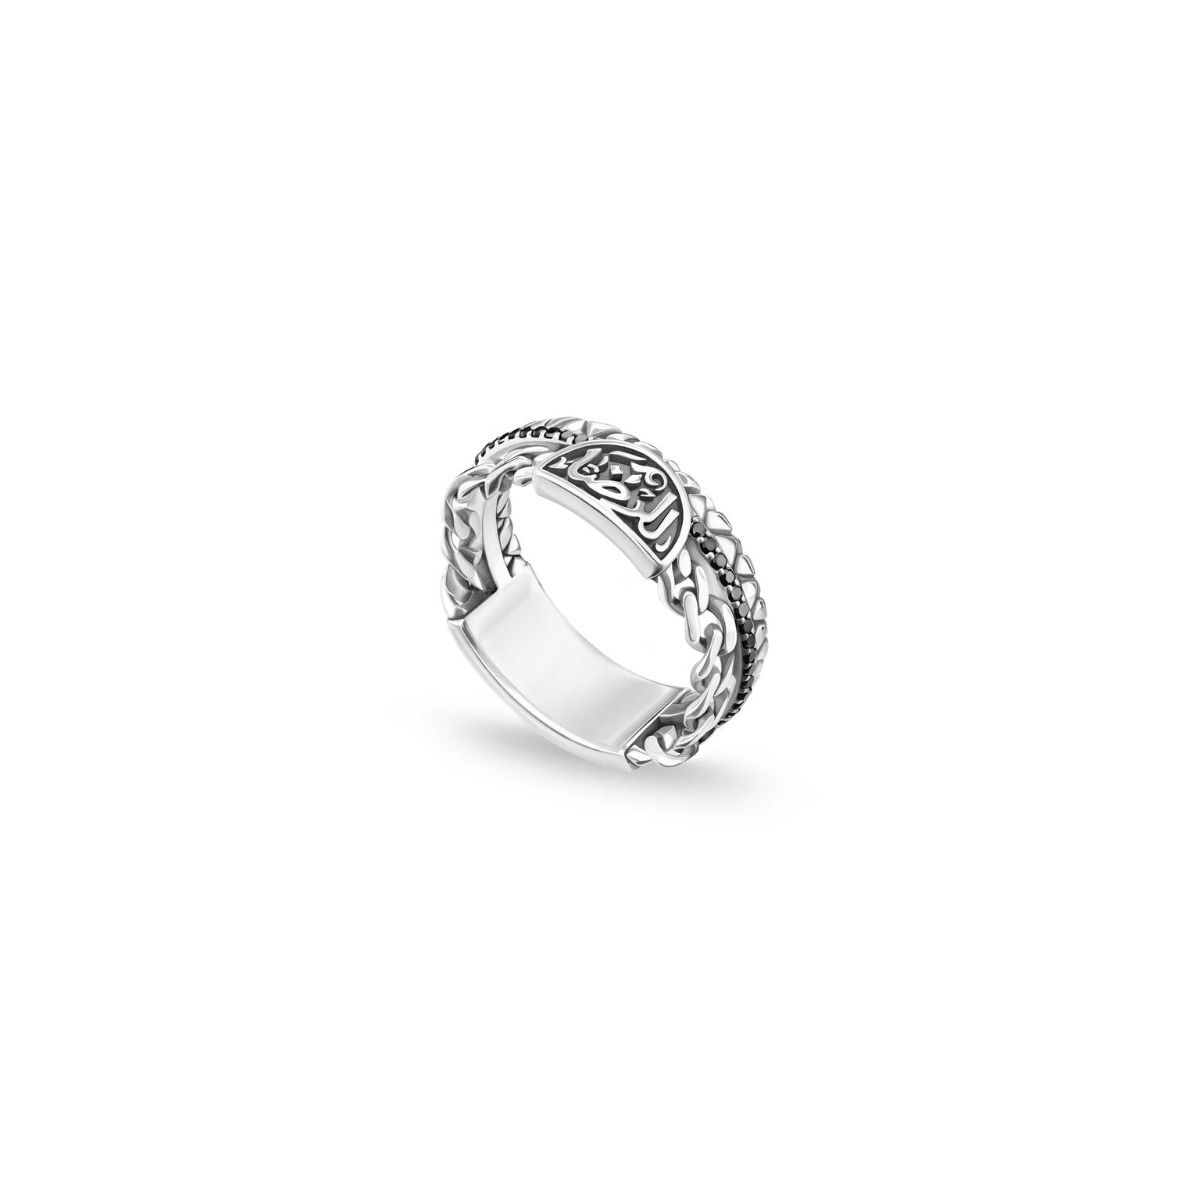 Contentment Ring by Azza Fahmy - Designer Rings